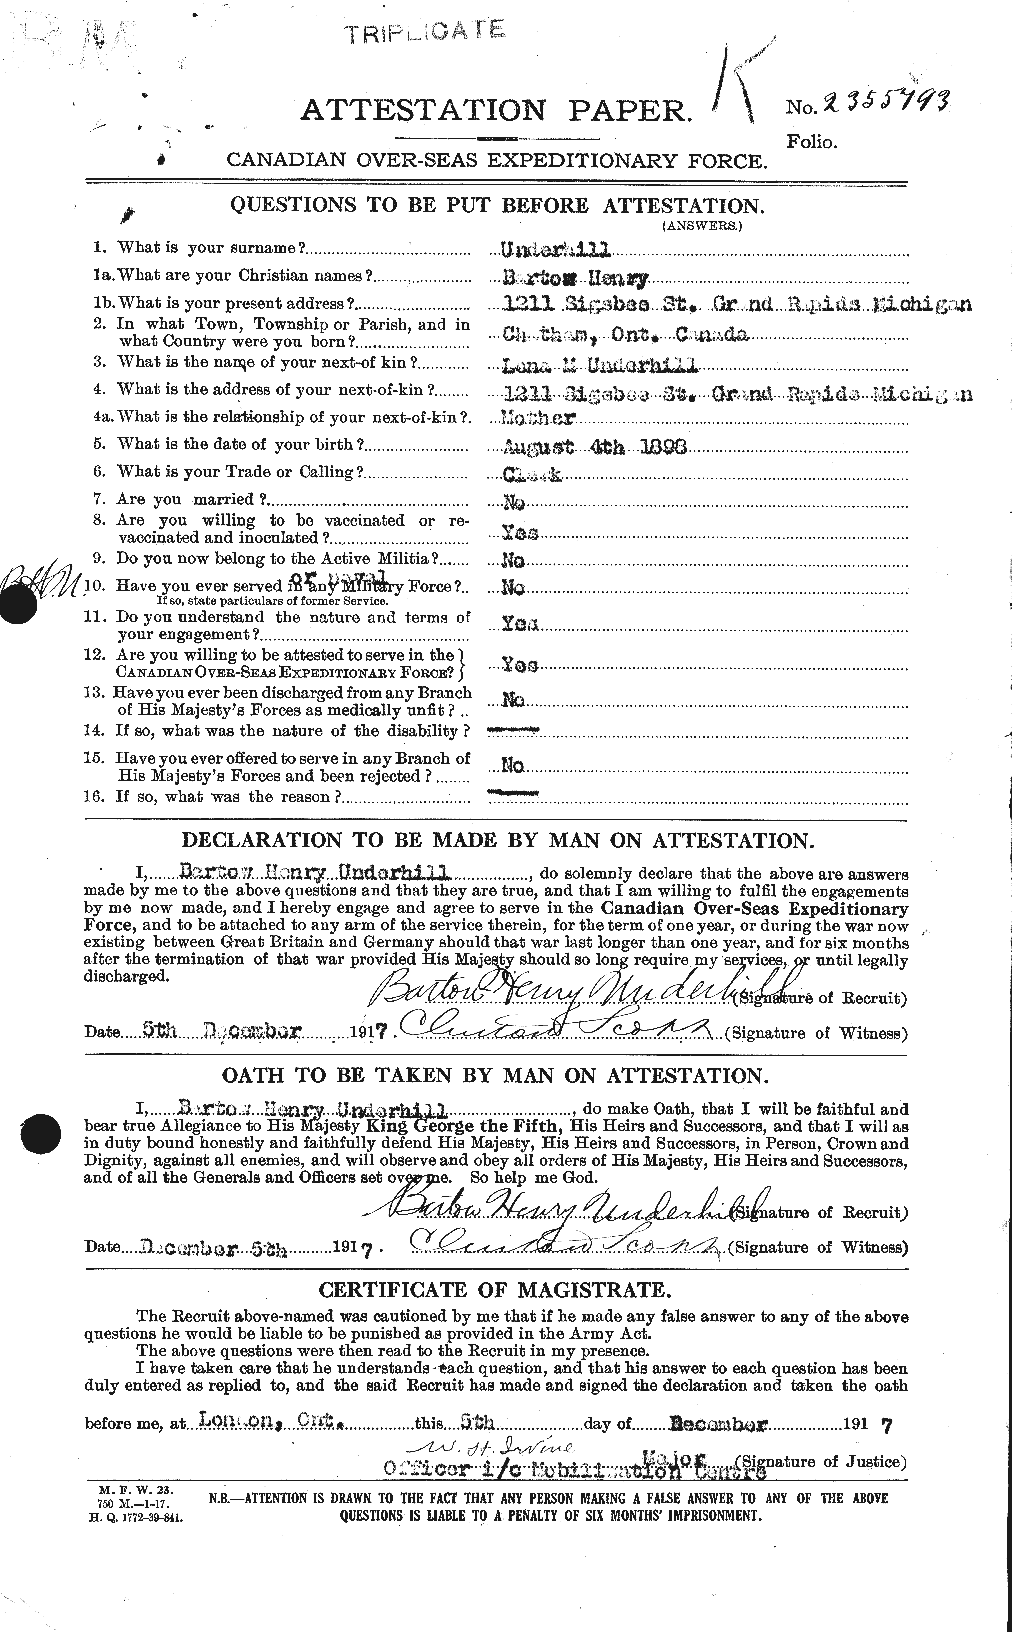 Personnel Records of the First World War - CEF 647075a